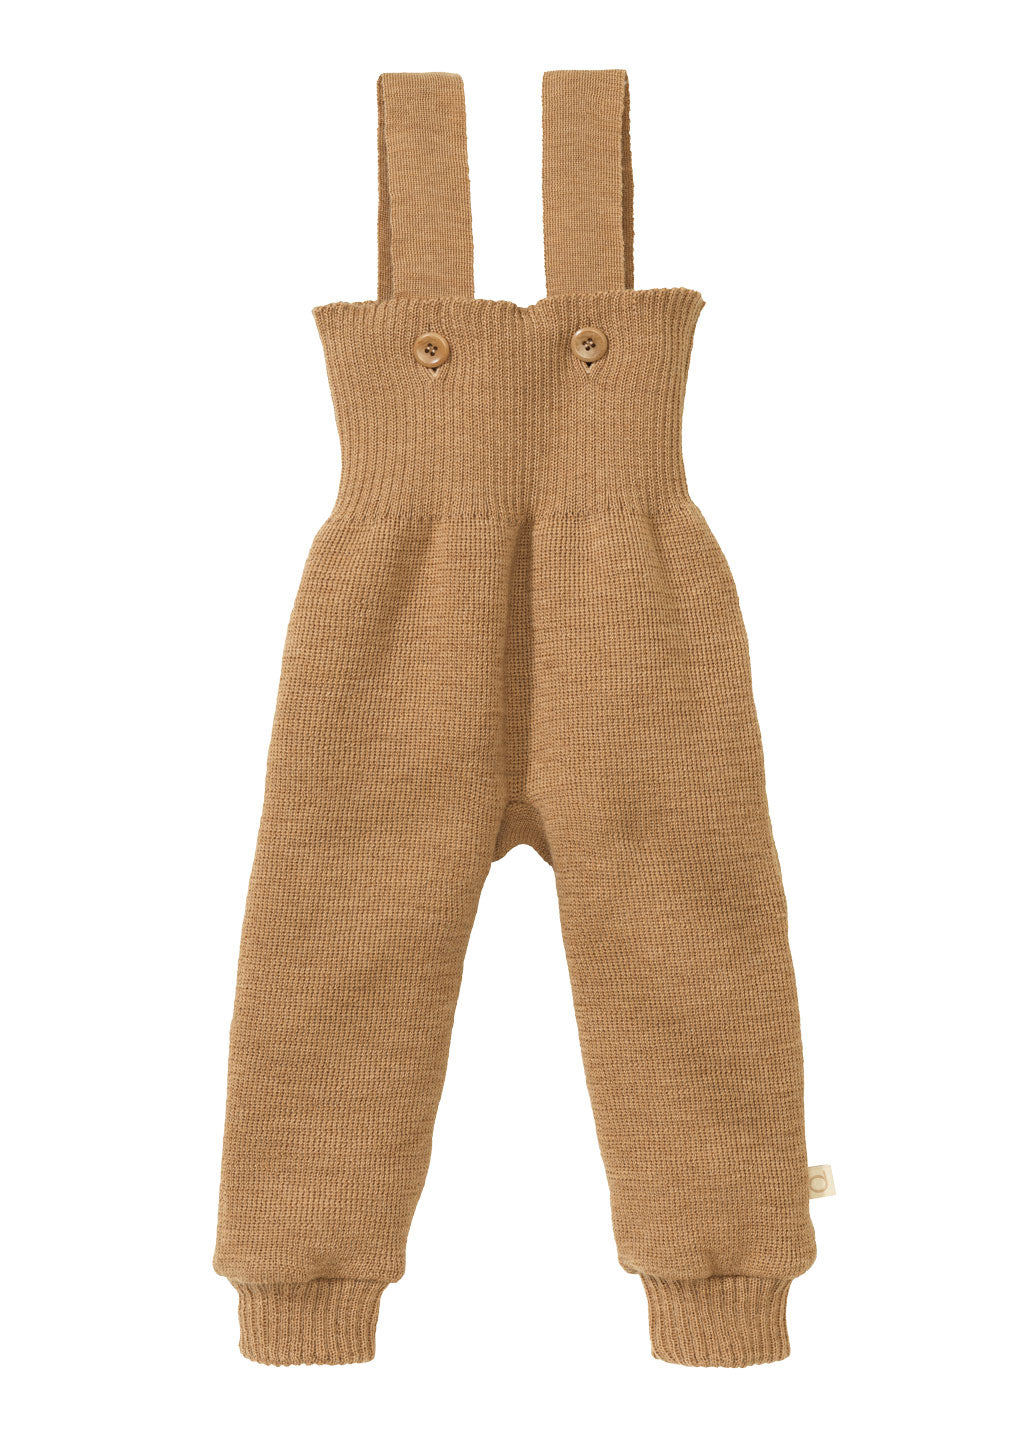 Disana Baby/Toddler Pants with Straps, Knitted Merino